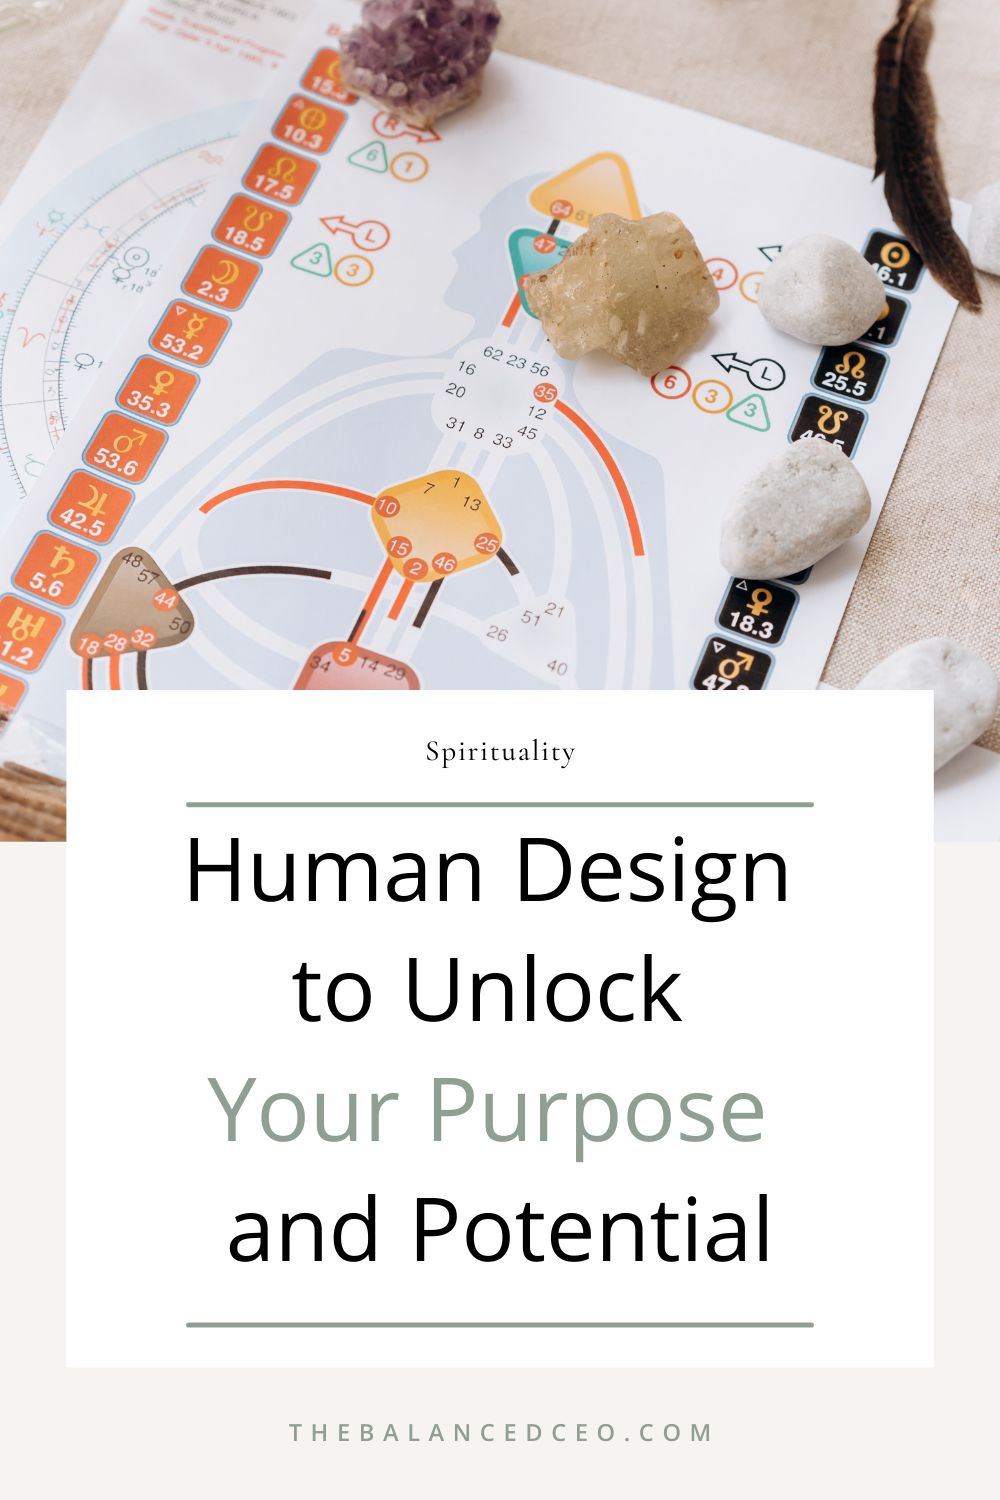 Human Design to Unlock Your Purpose and Potential